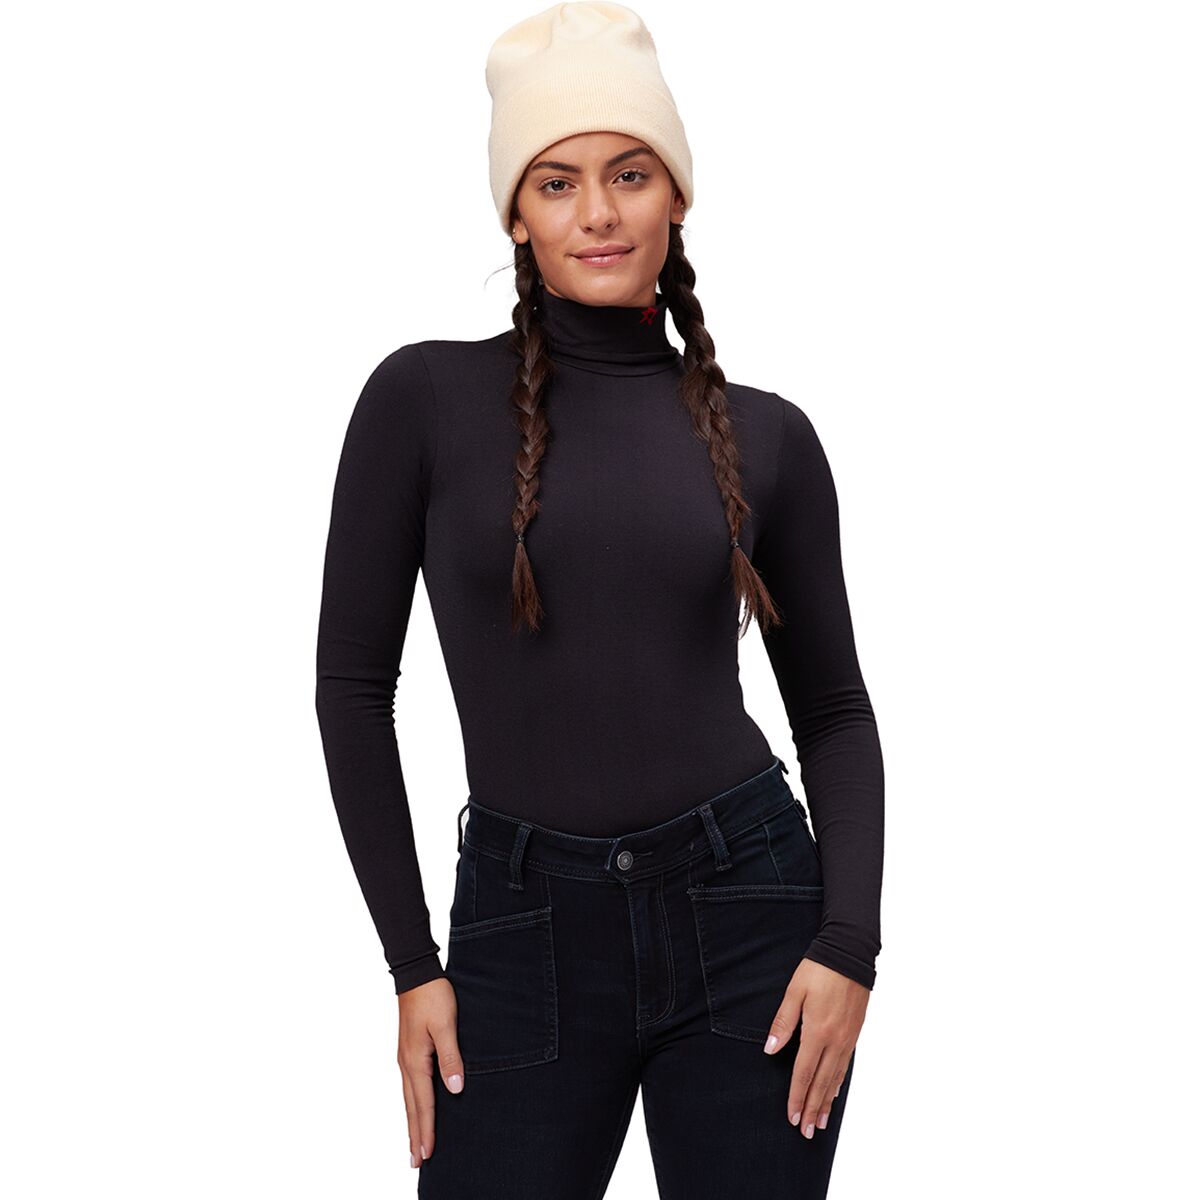 Perfect Moment Base Body Suit - Women's